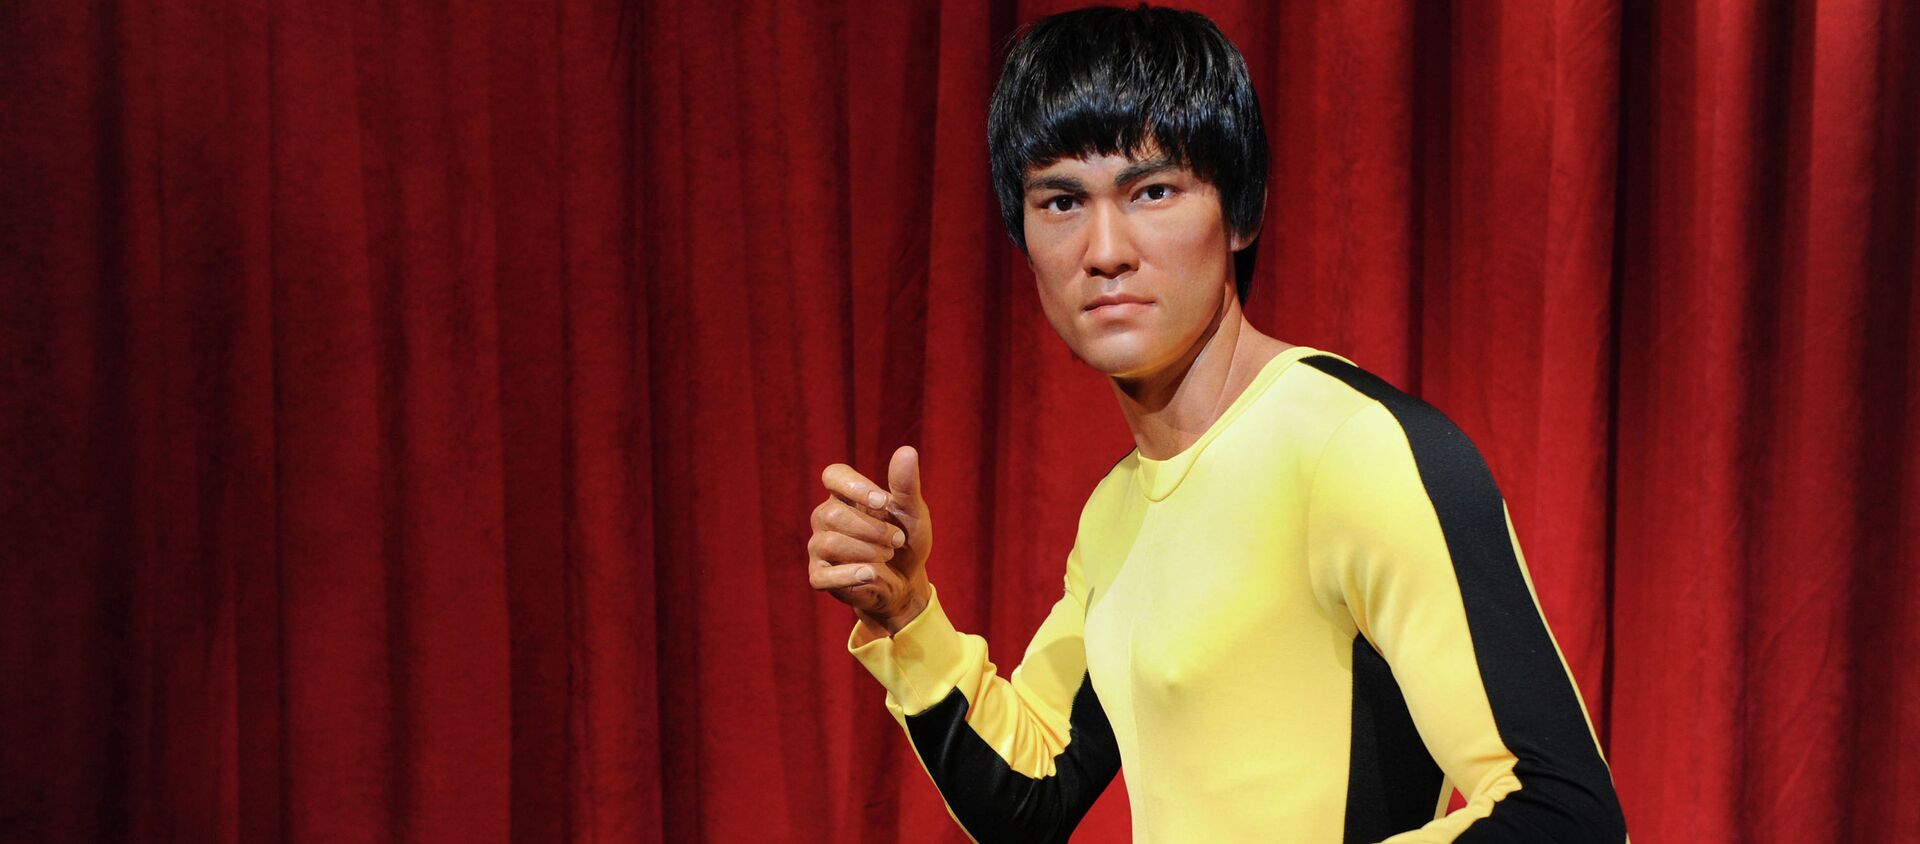 Madame Tussauds New York welcomes Bruce Lee's wax figure - 俄羅斯衛星通訊社, 1920, 27.11.2020